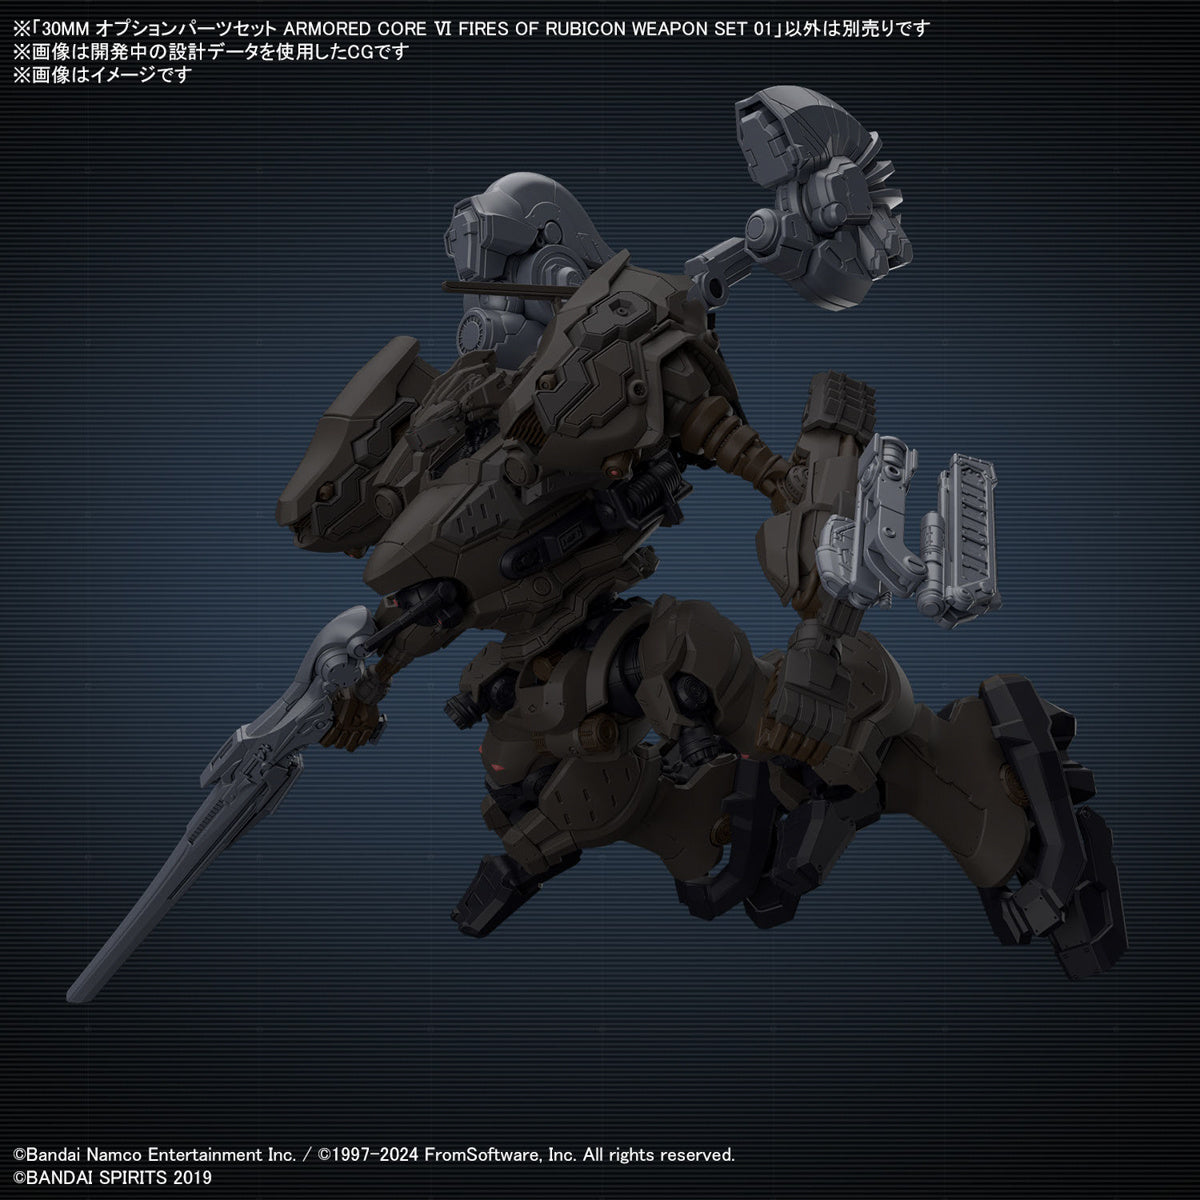 30MM ARMORED CORE - OPTION PARTS SET VI FIRES OF RUBICON - WEAPON SET 01